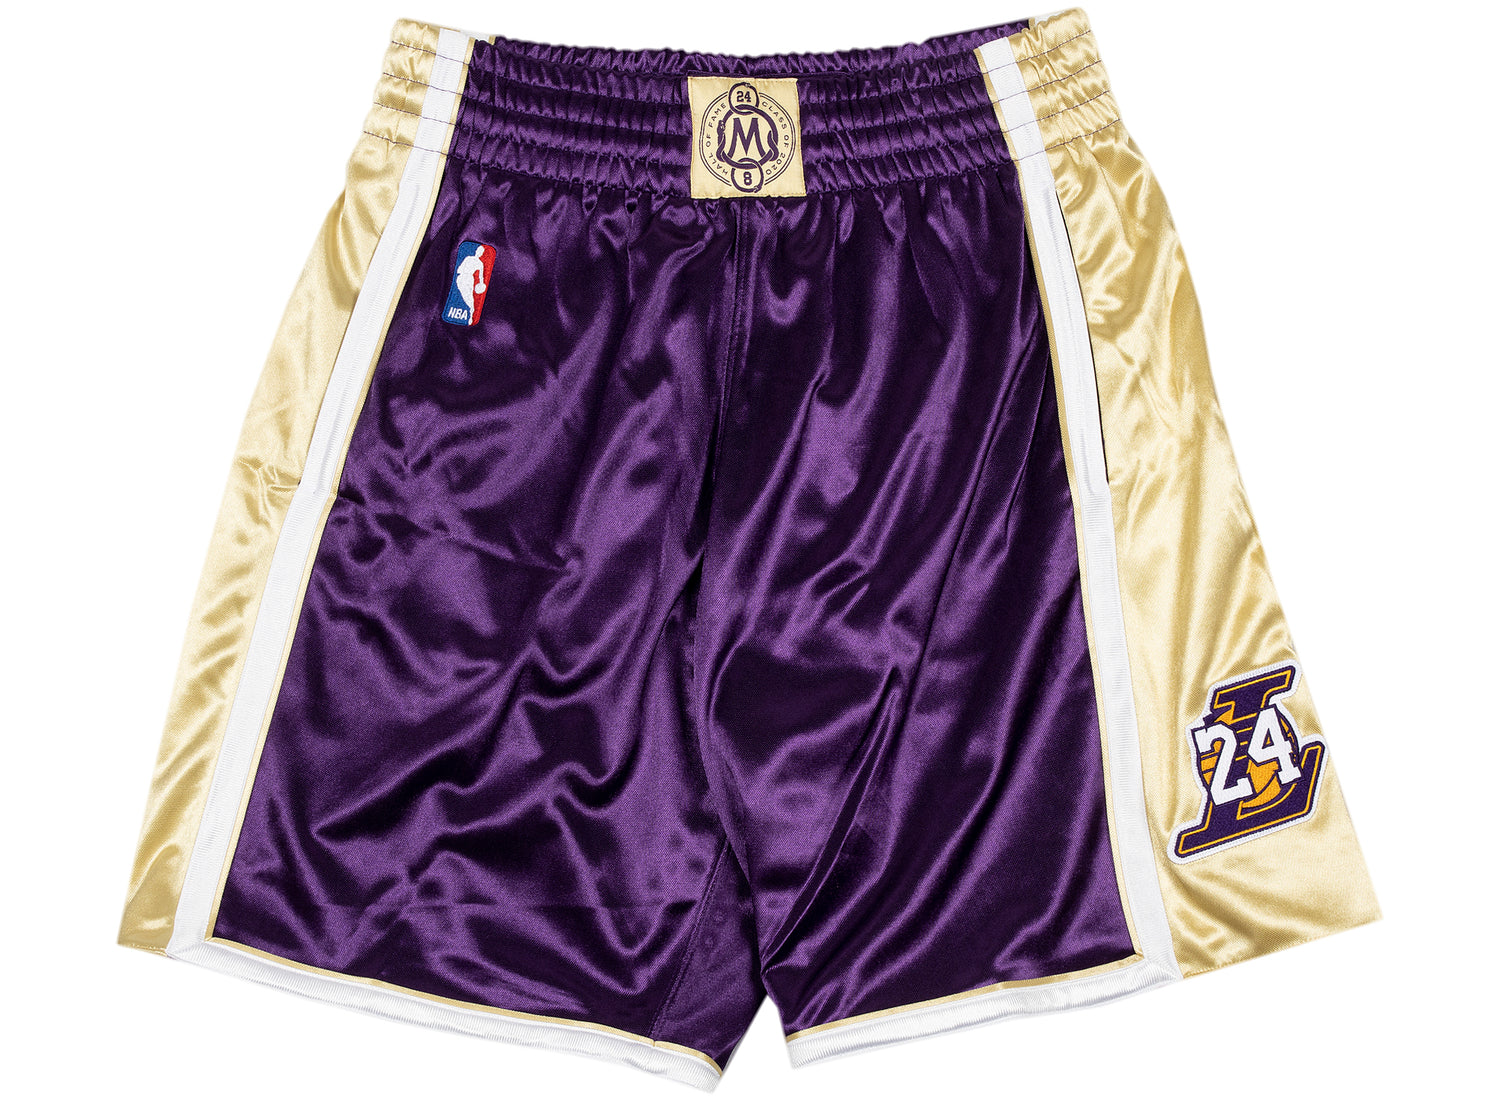 NBA Authentic Shorts from Mitchell & Ness Mitchell & Ness